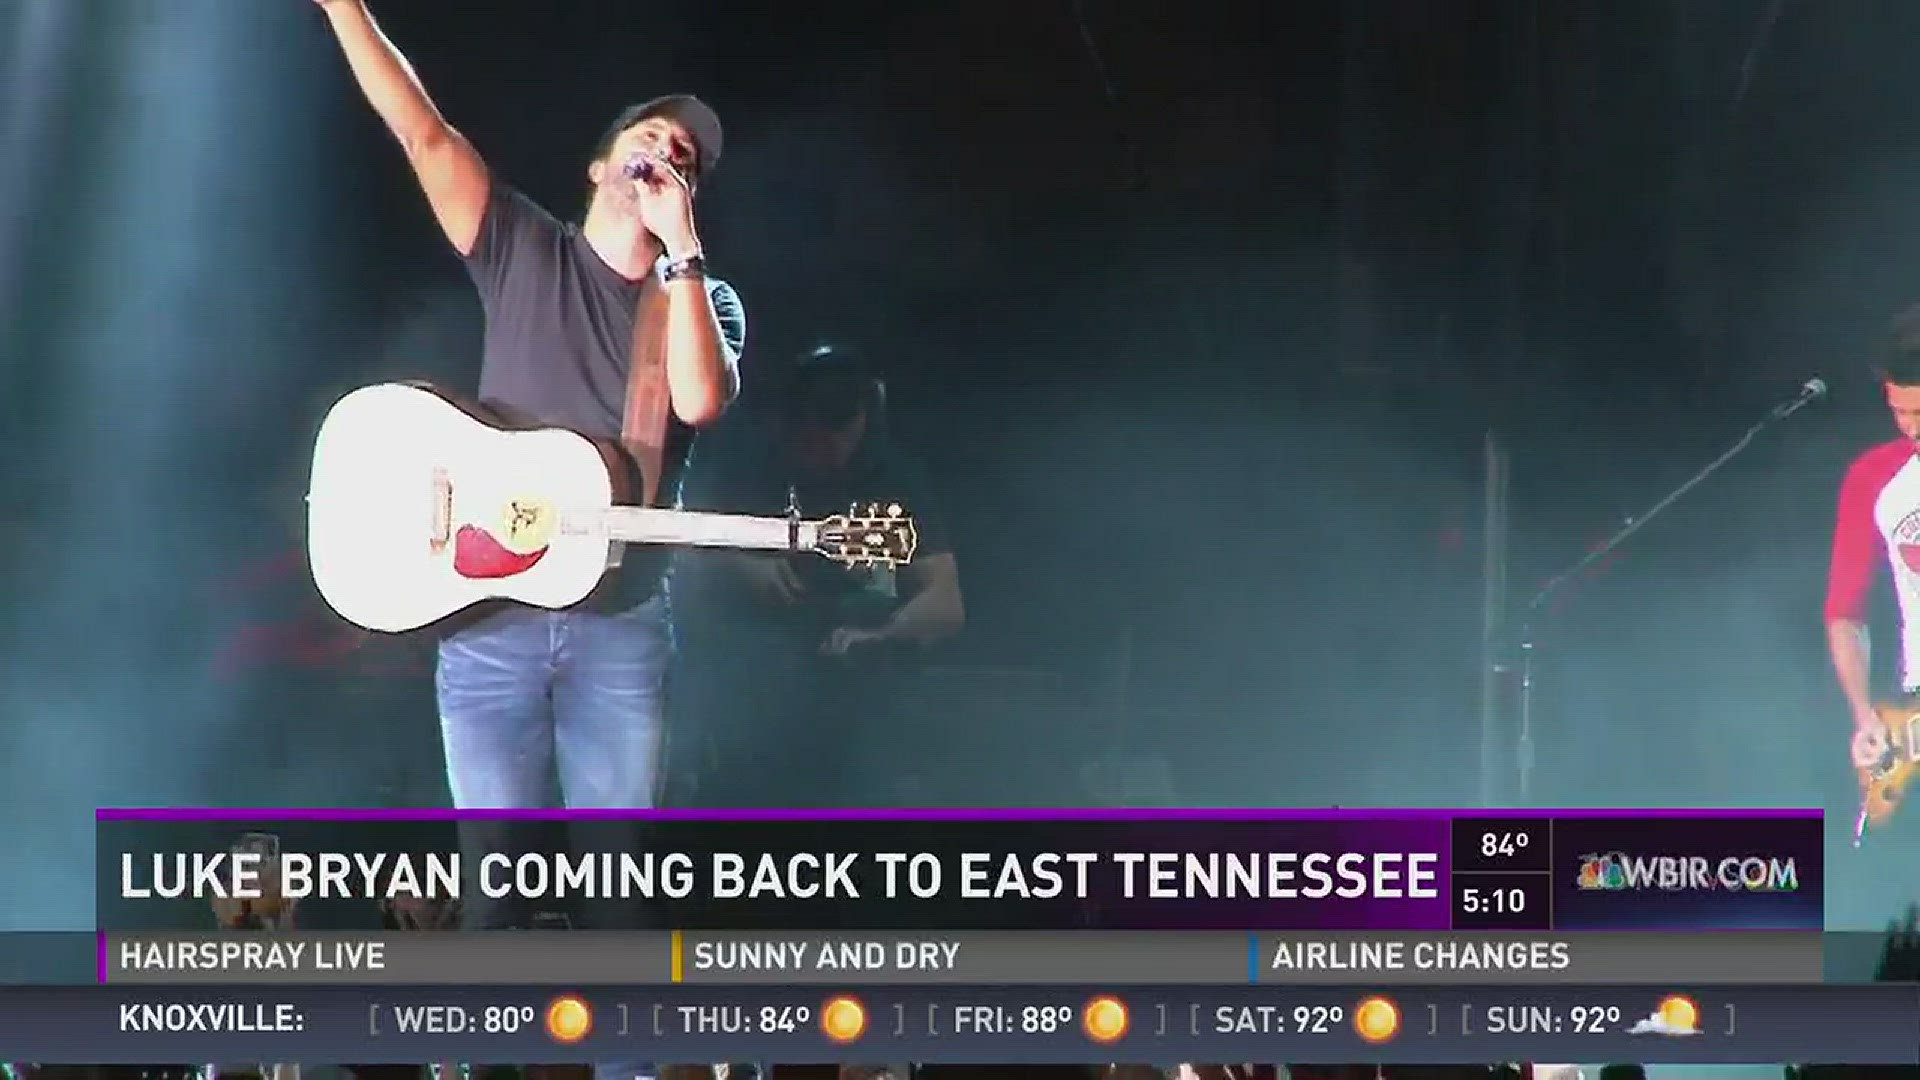 Country singer Luke Bryan will be coming back to East Tennessee in a couple weeks for his farm tour